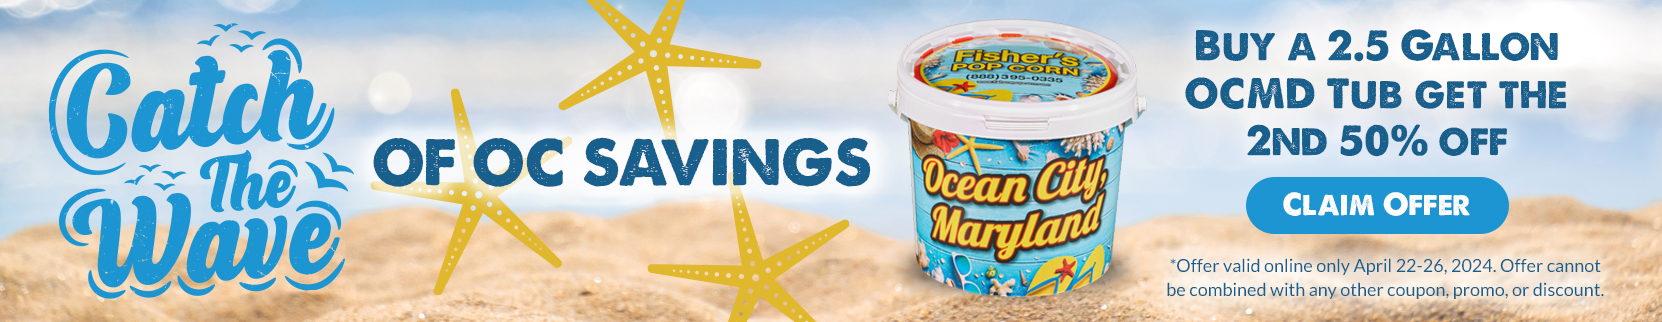 Catch the Wave of OC Savings banner for Fisher's Popcorn